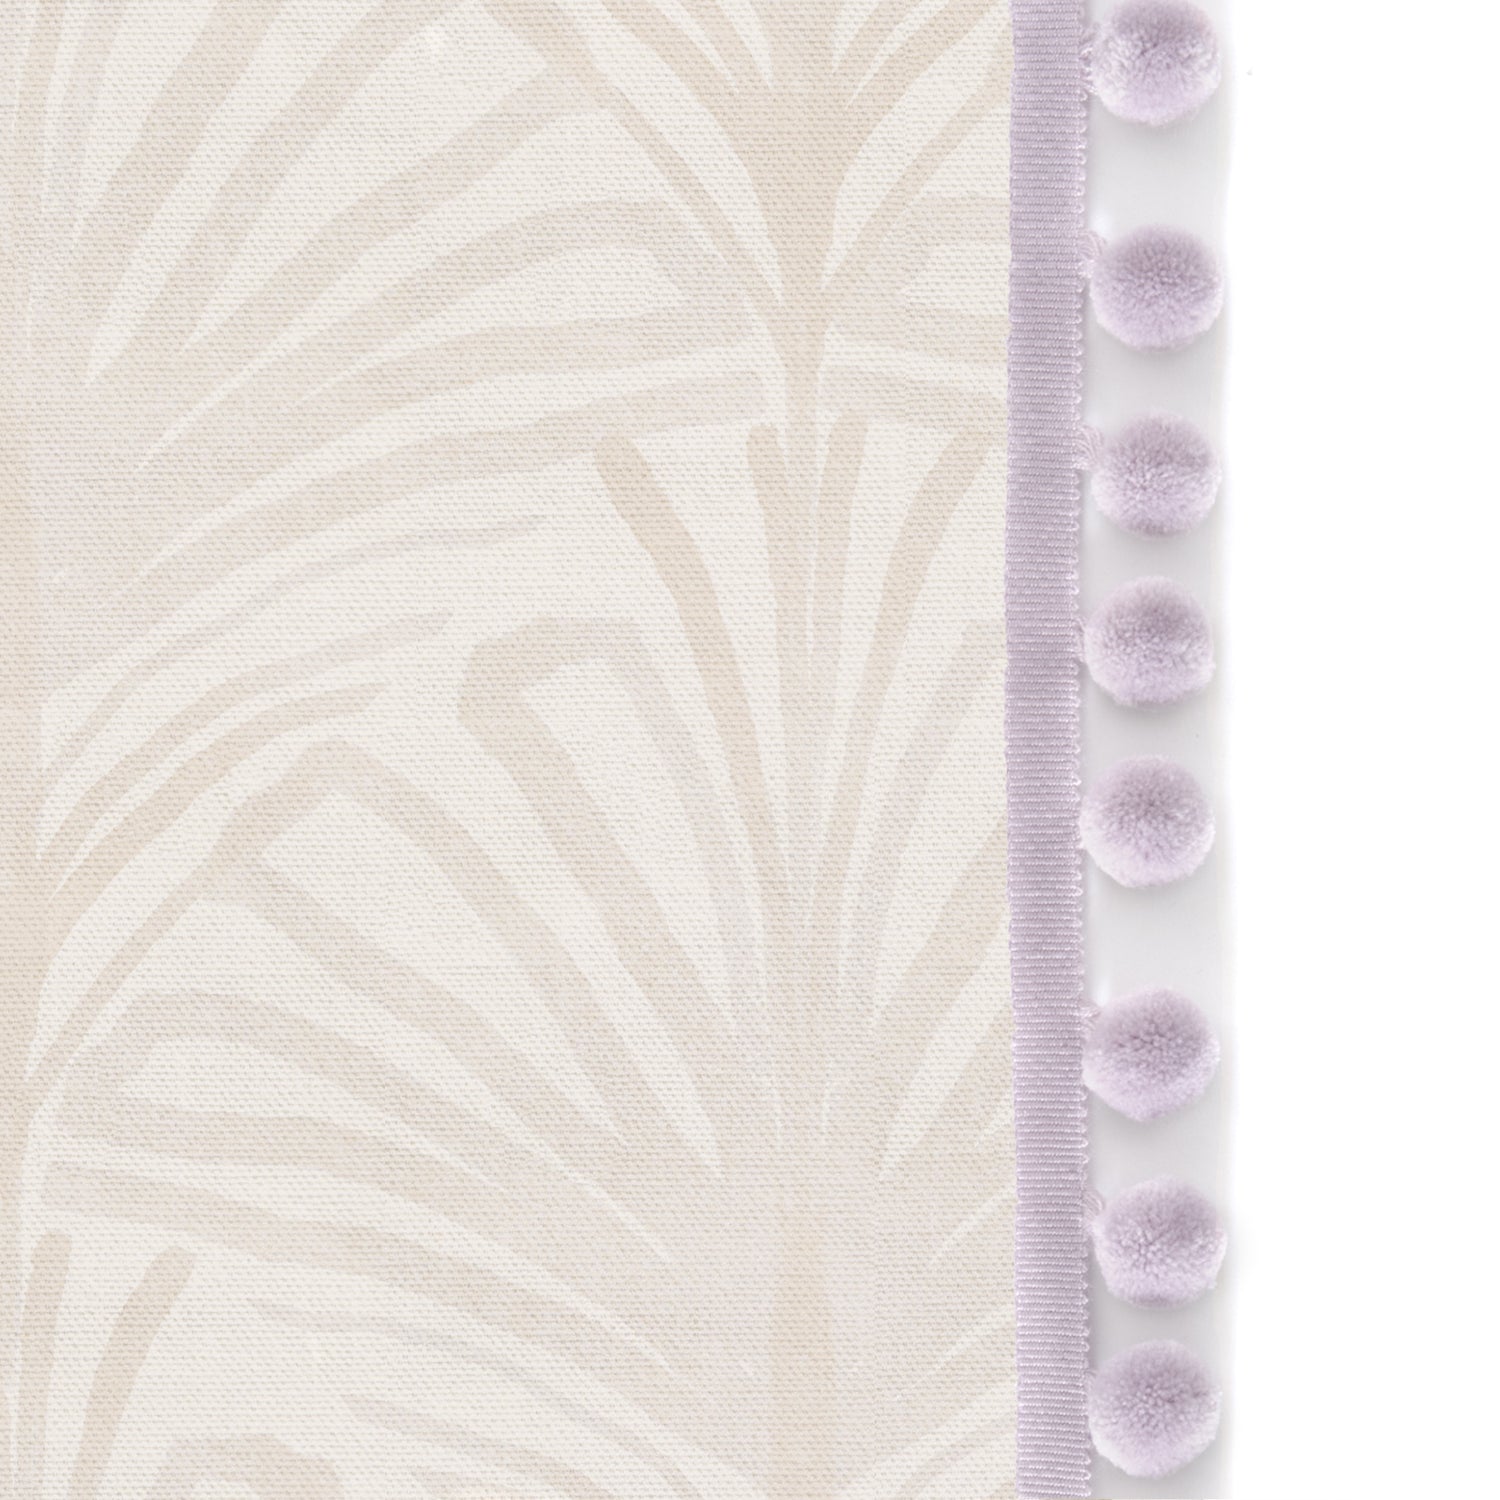 Upclose picture of Suzy Sand custom Beige Palmshower curtain with lilac pom pom trim